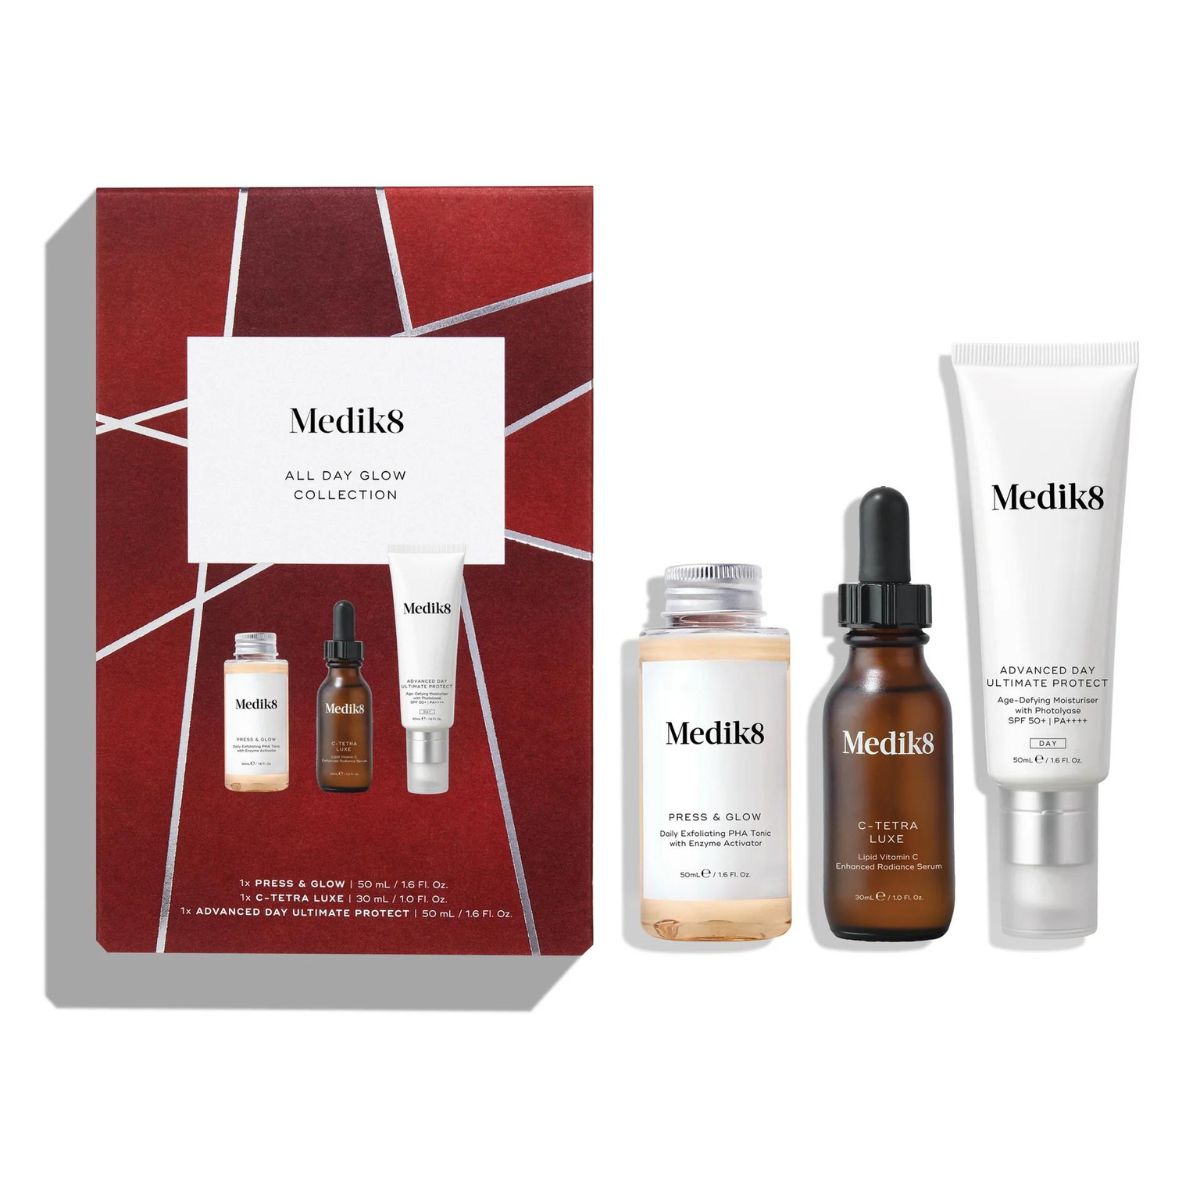 Medik8 All Day Glow Collection Gift Set